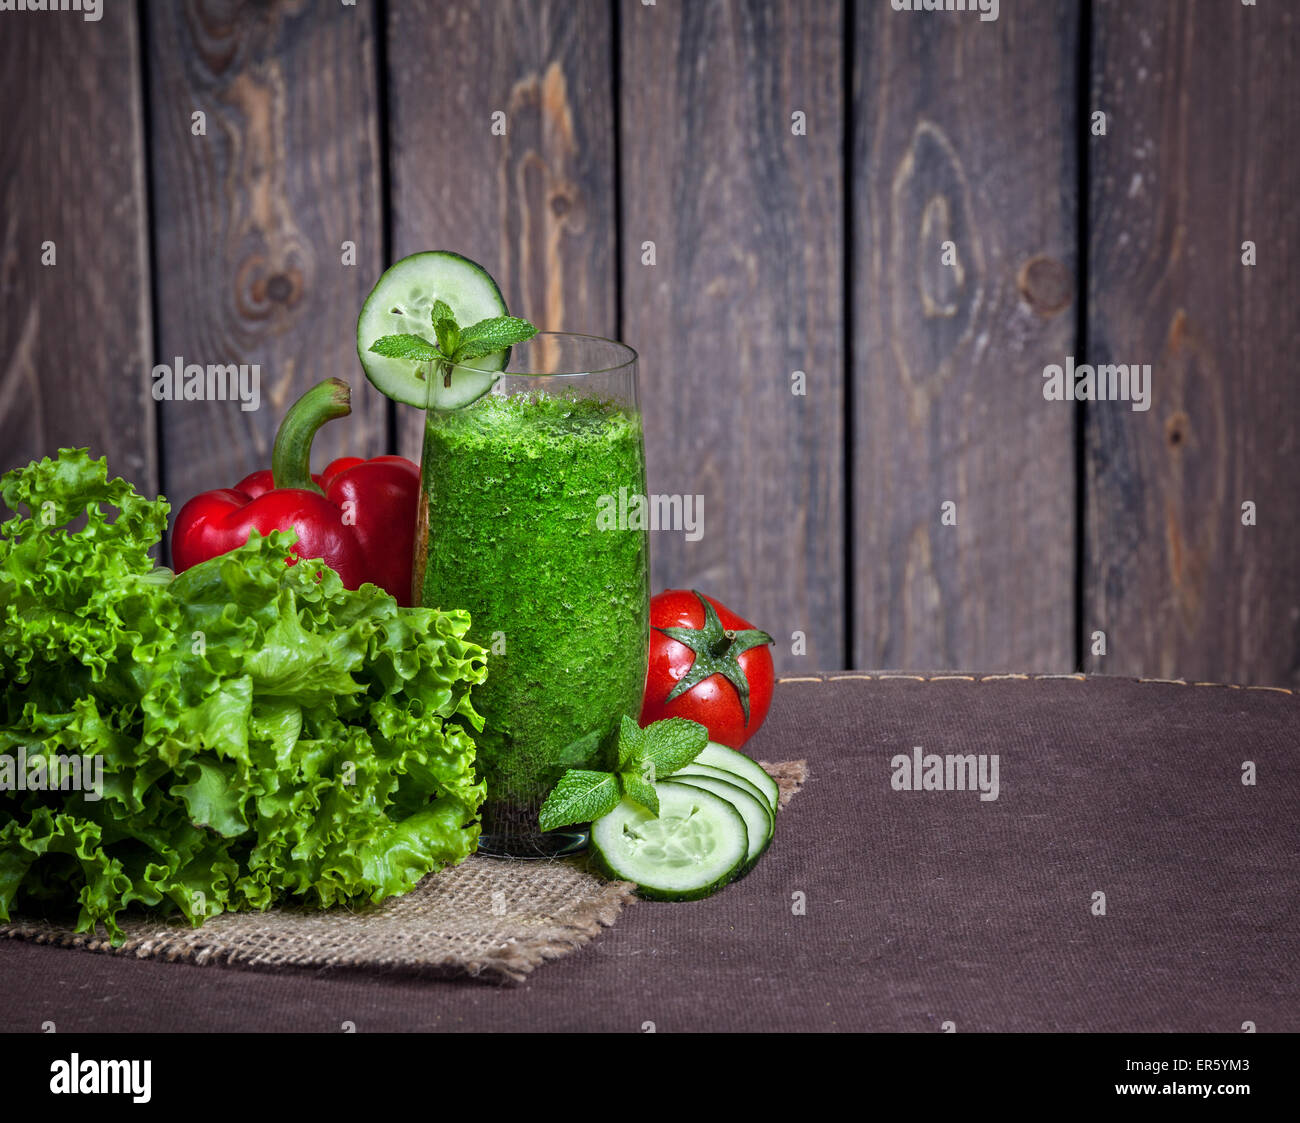 Fresh green smoothie with cucumber, green salad leaves, tomato and red capsicum at wooden background Stock Photo